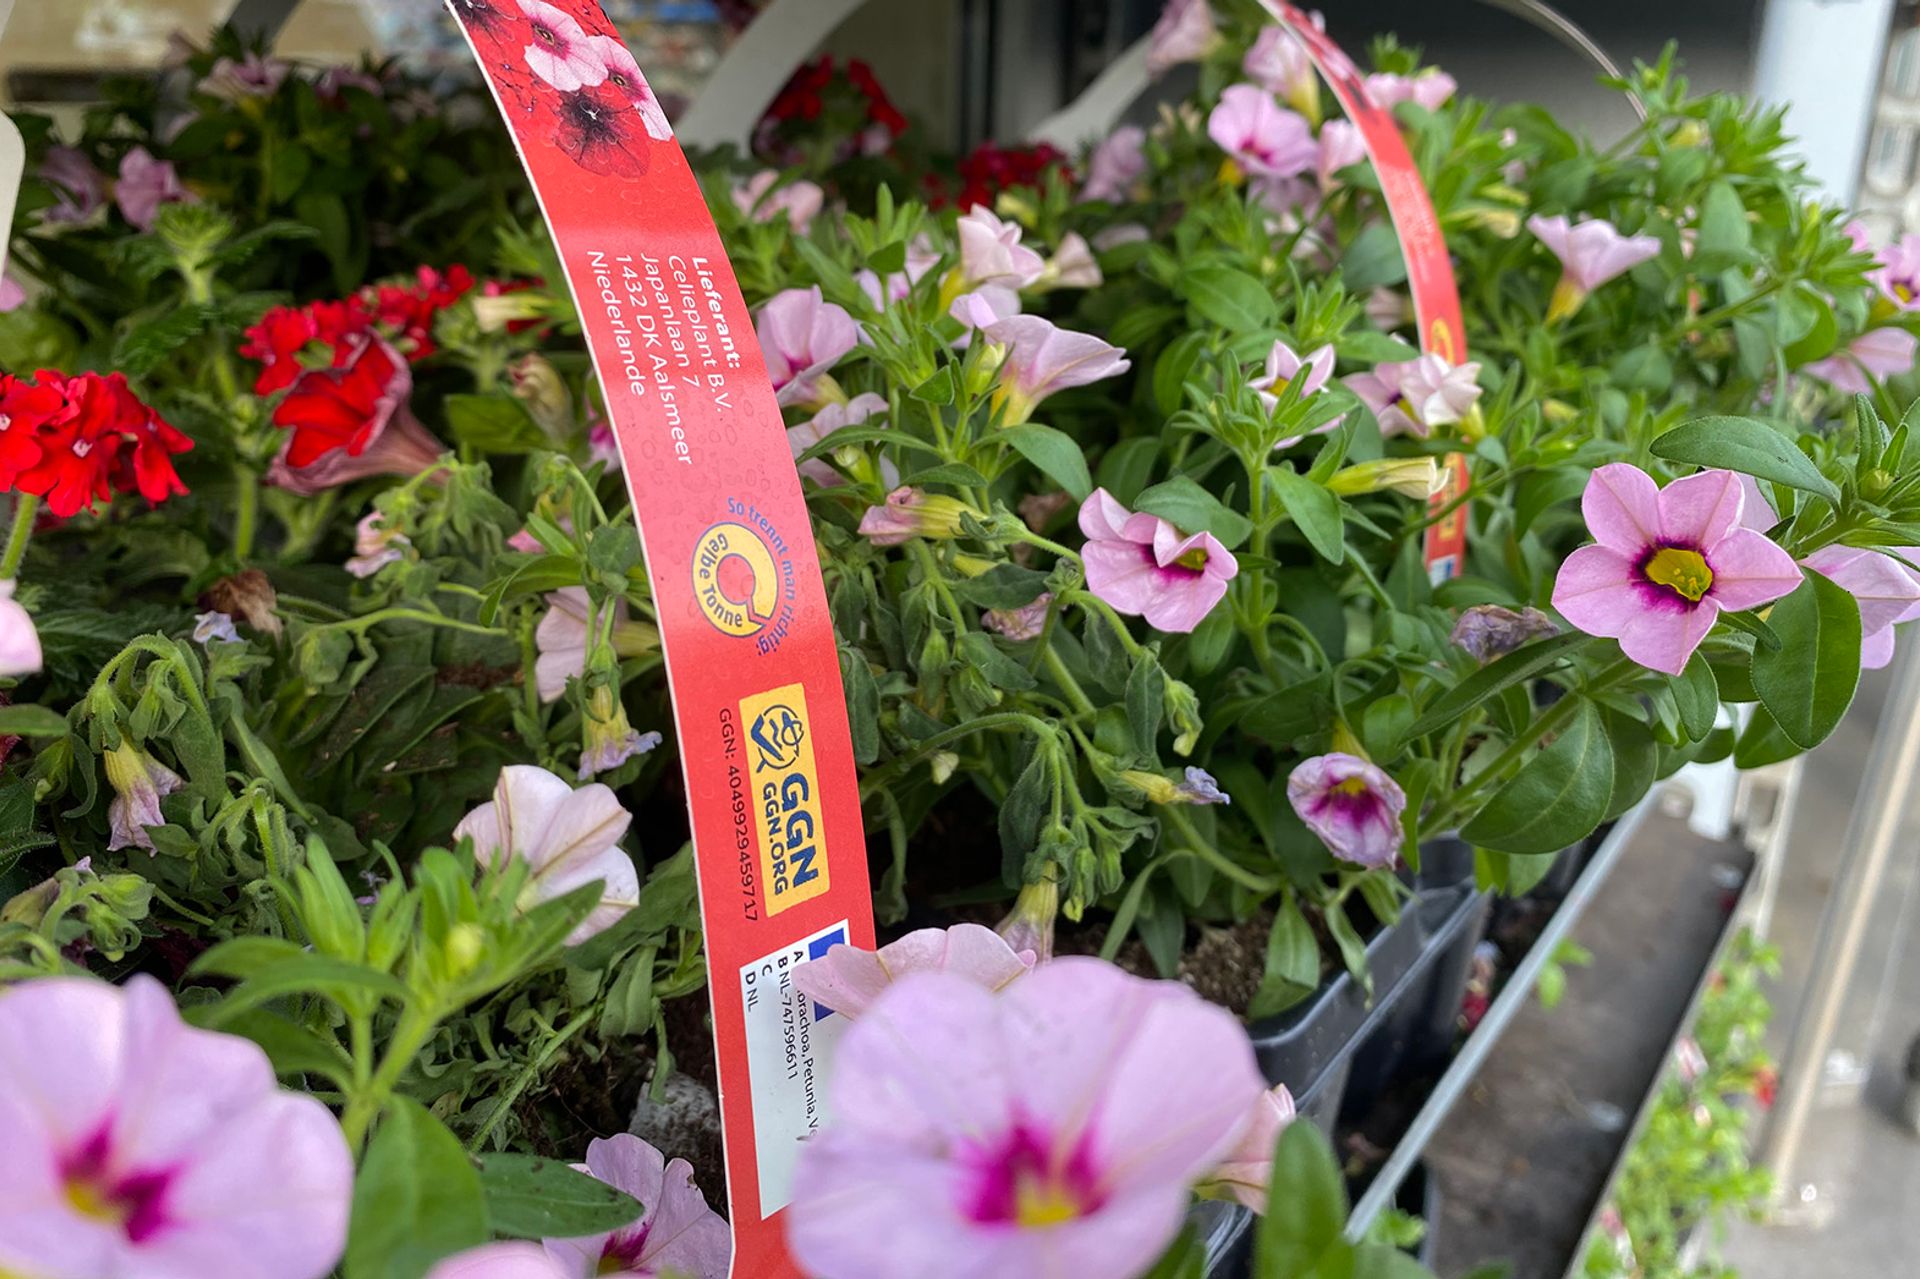 Image of flowers with the GGN label on sale at a garden center